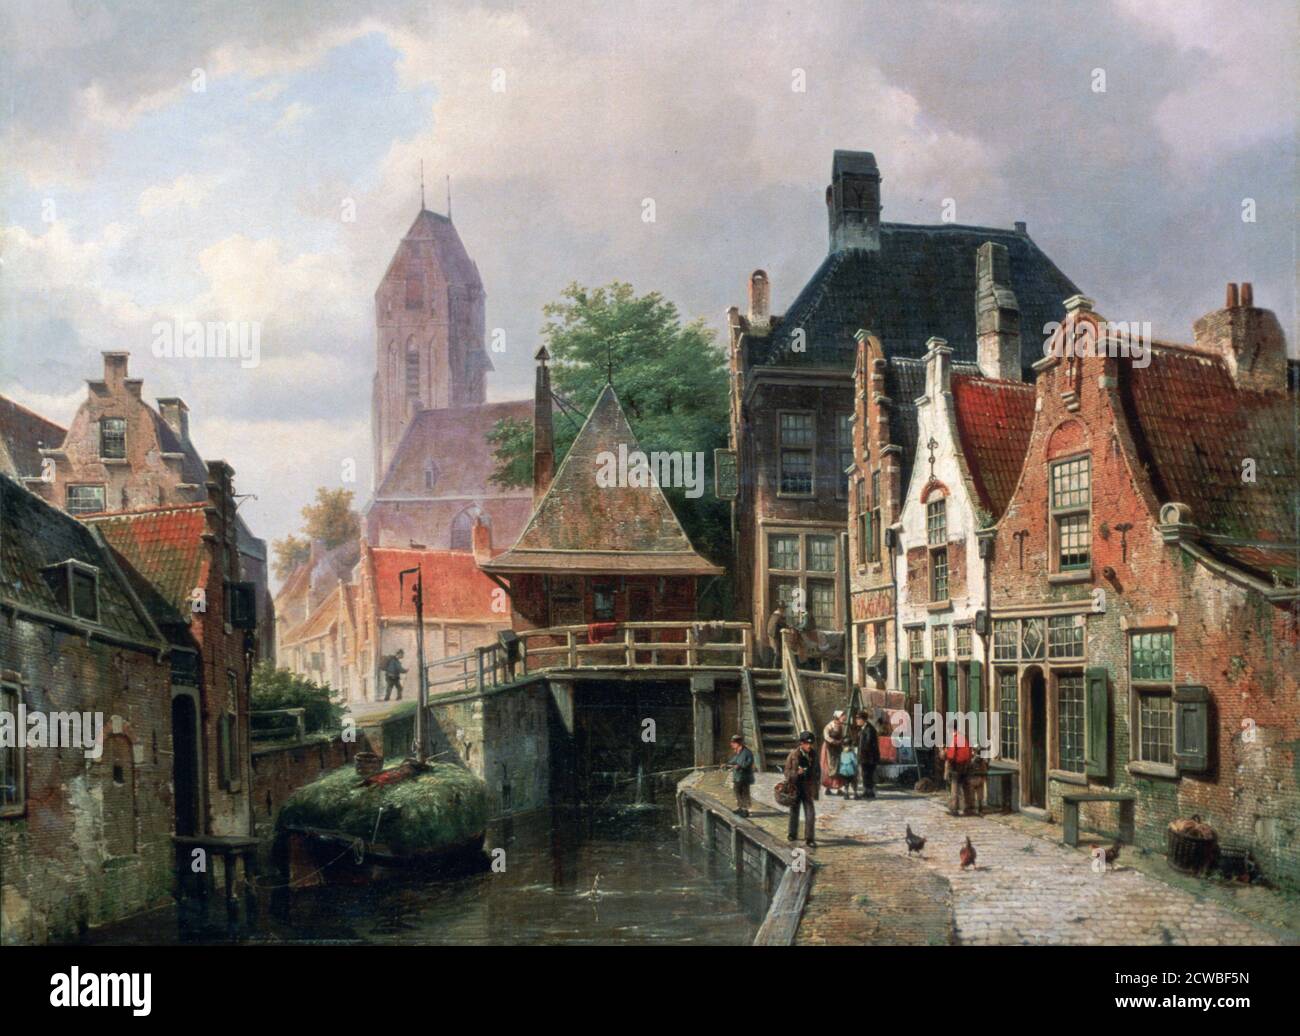 View of Oudewater', c1867. Artist: Hermanus Koekkoek. Hermanus Koekkoek(1815-1882) was a 19th-century painter from the Netherlands. He is known for landscapes and seascapes and taught his sons to paint in the family tradition. Stock Photo